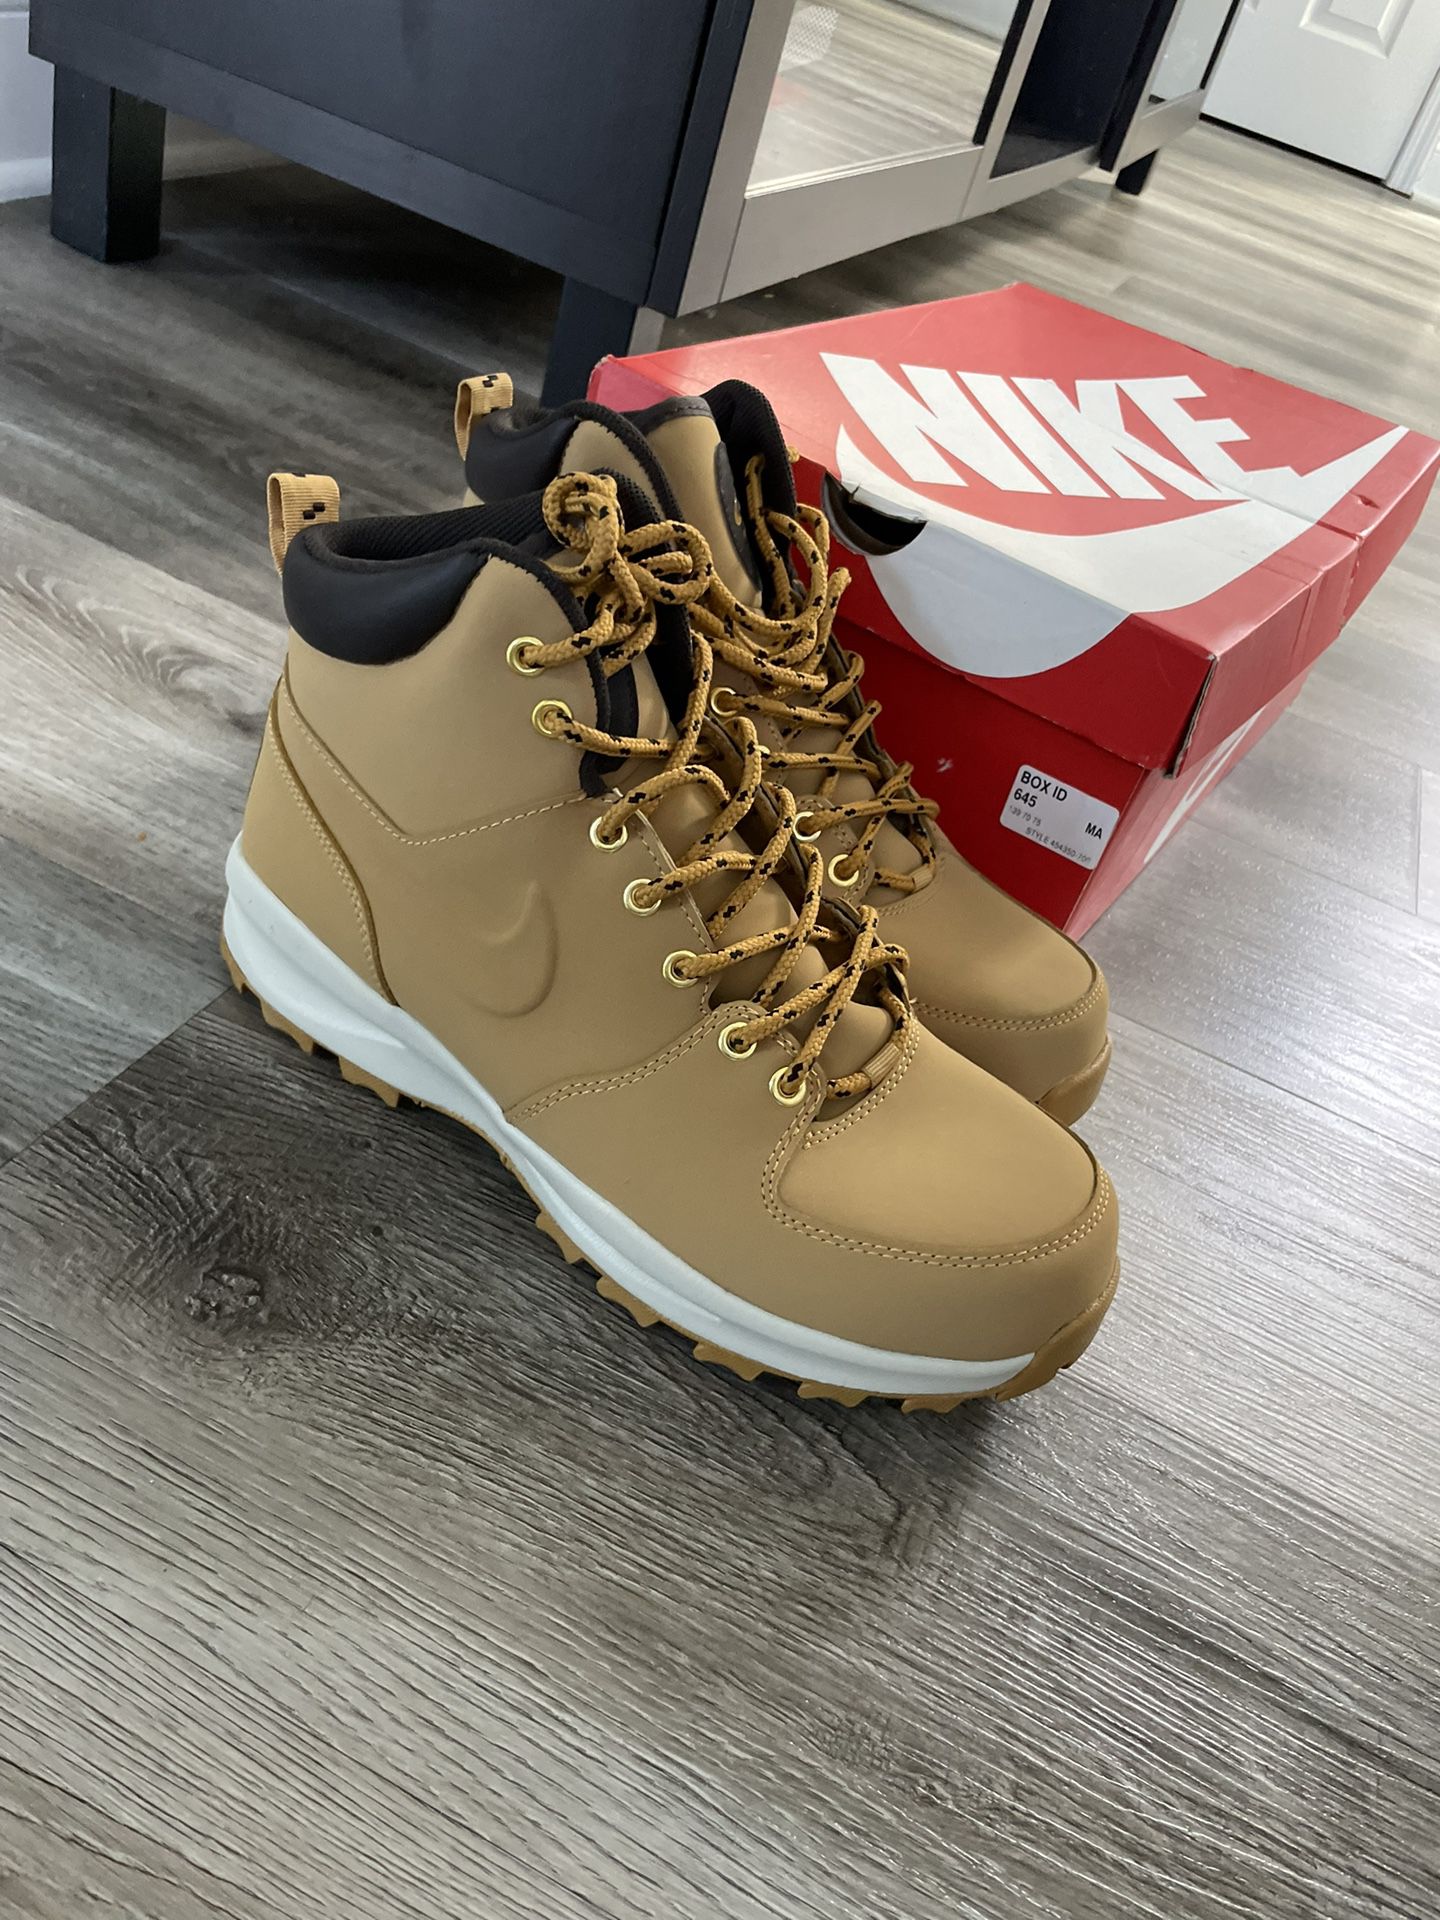 Nike Manoa Leather Men's Boots